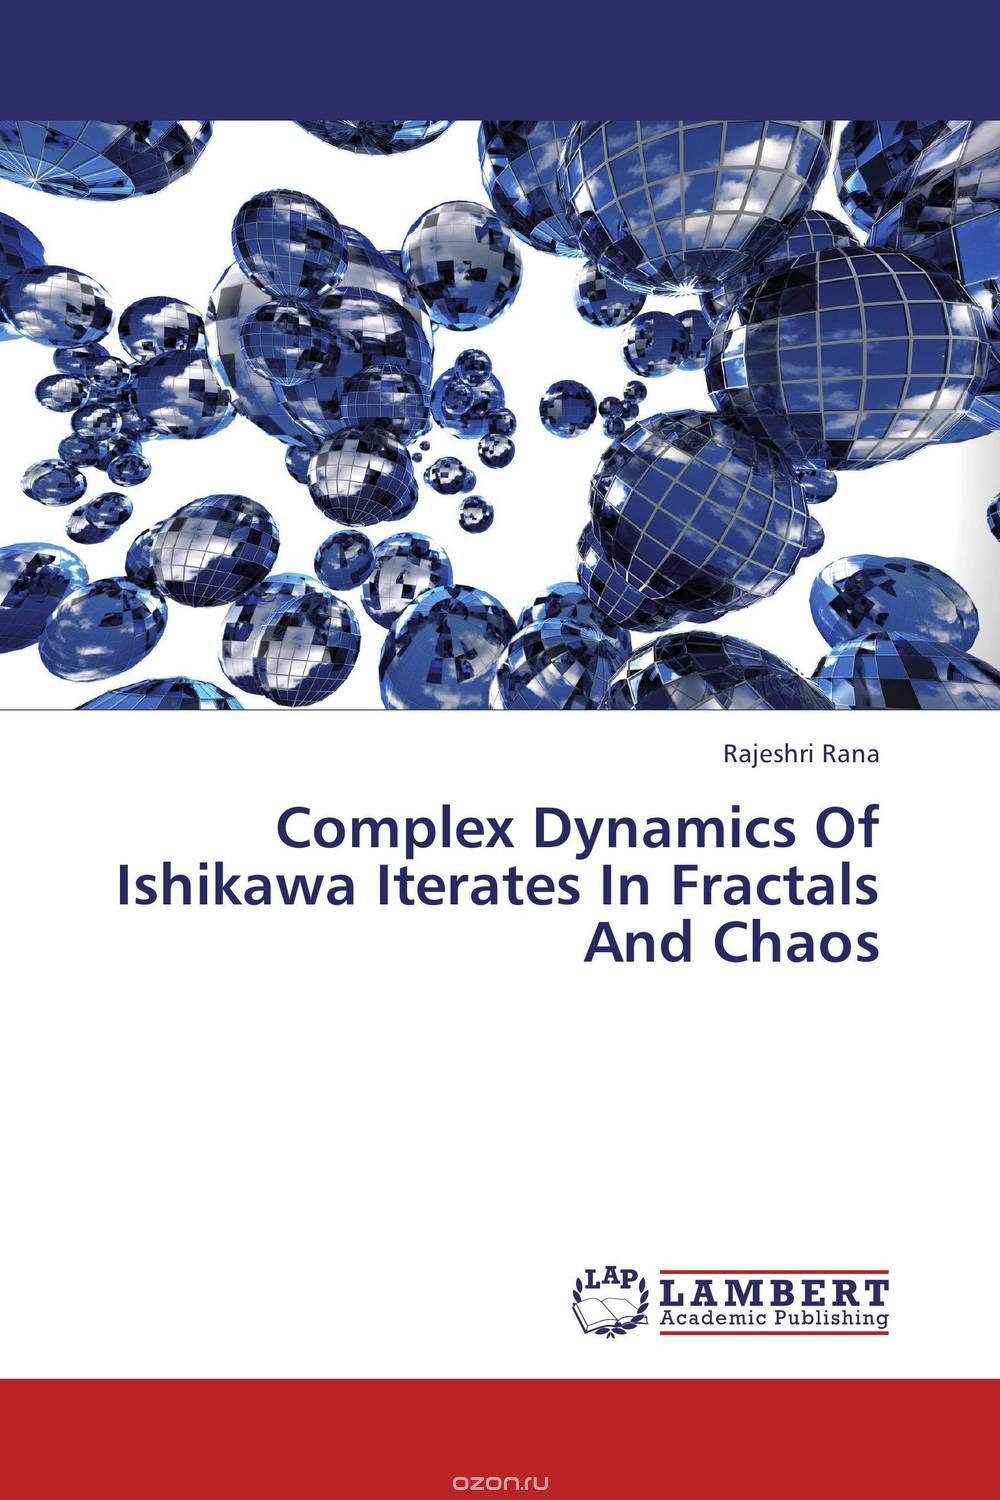 Complex Dynamics Of Ishikawa Iterates In Fractals And Chaos